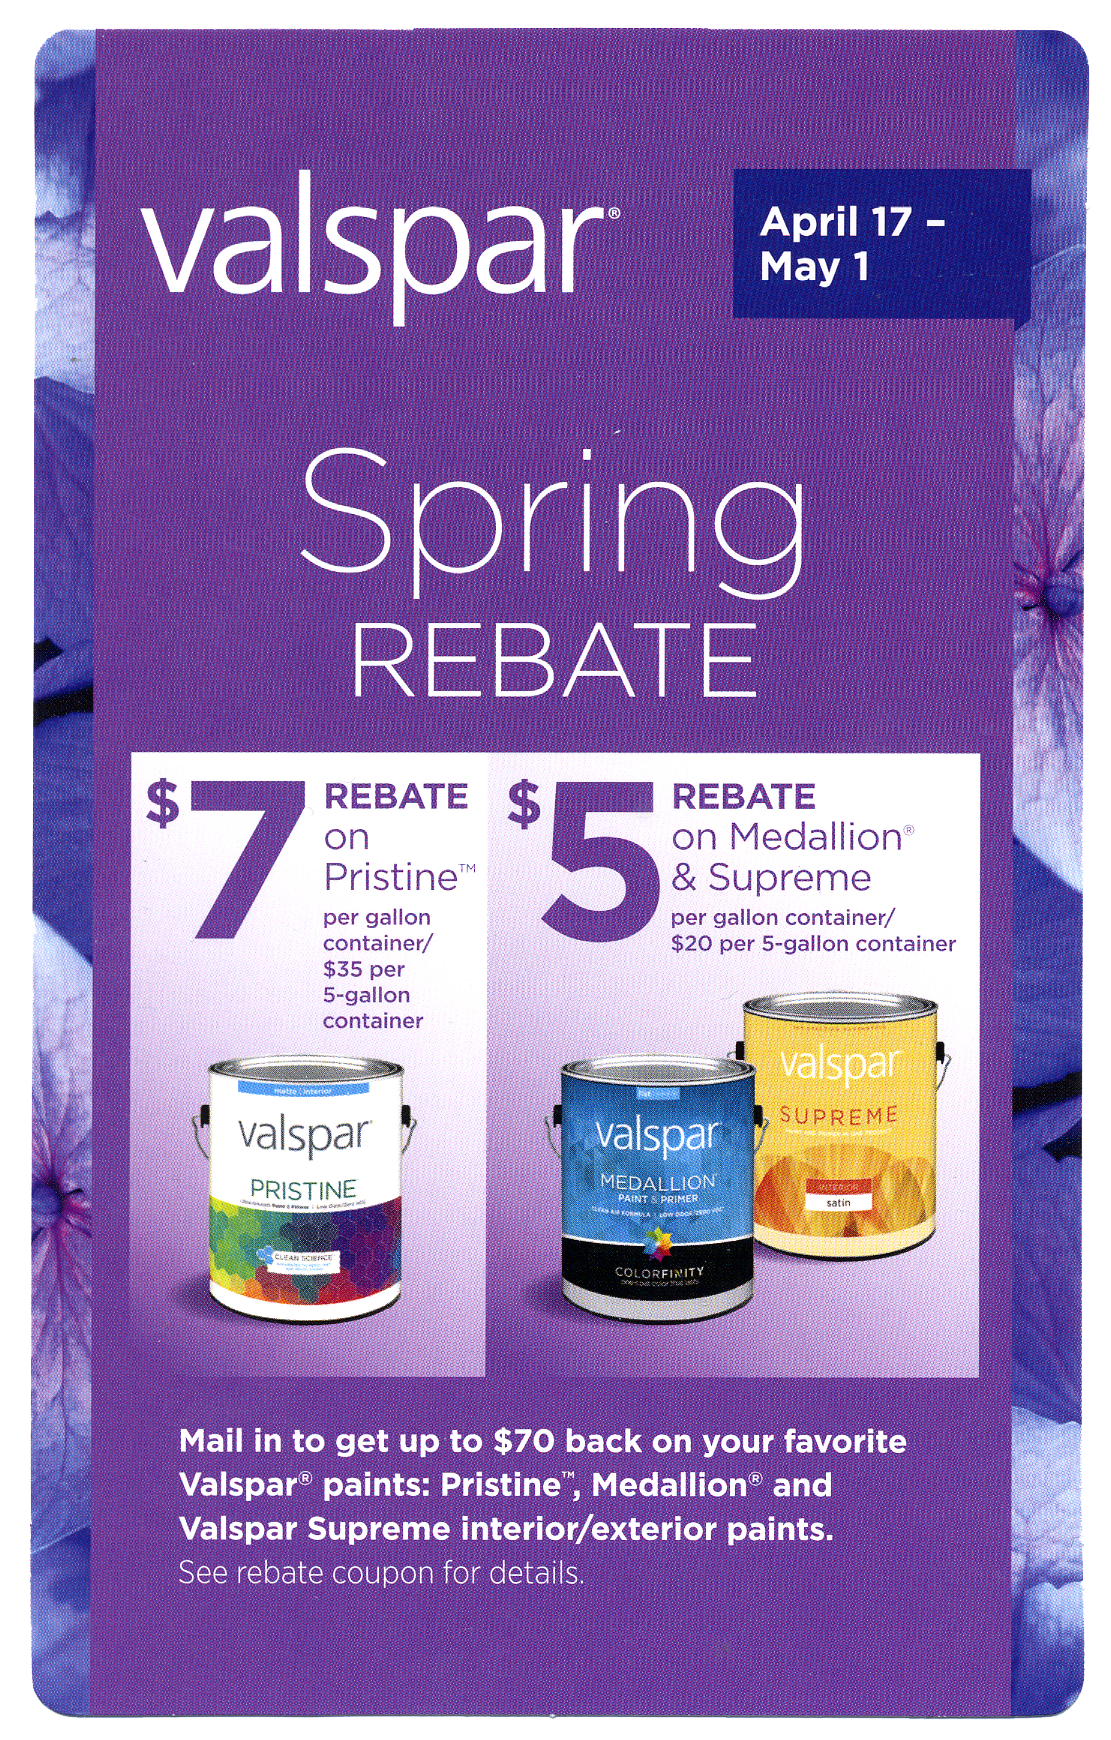 rebates-on-valspar-paint-and-cabot-stain-at-pohaki-pohaki-lumber